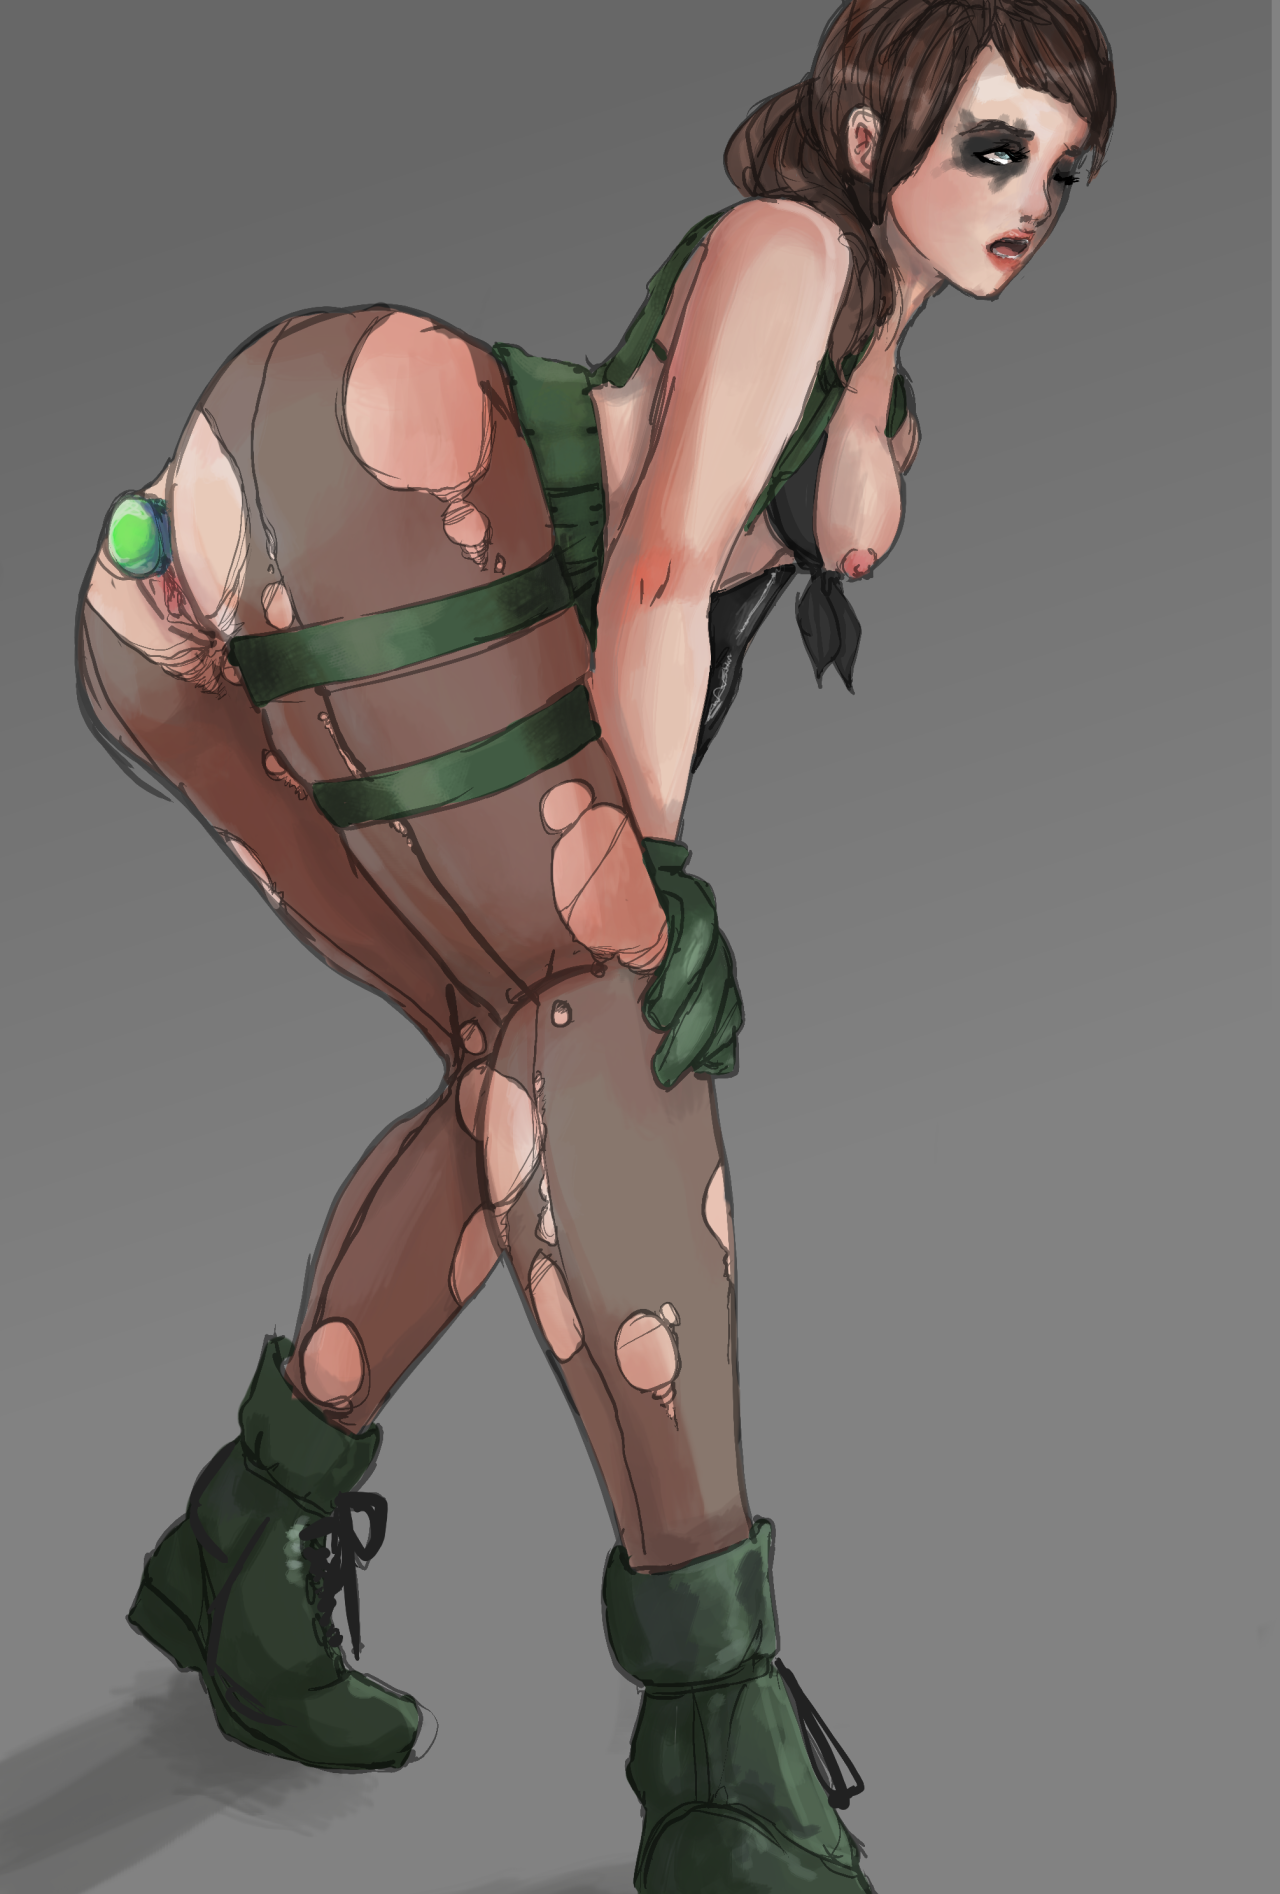 More Quiet From Metal Gear Solid V Rule 34 Page 2 Nerd Porn